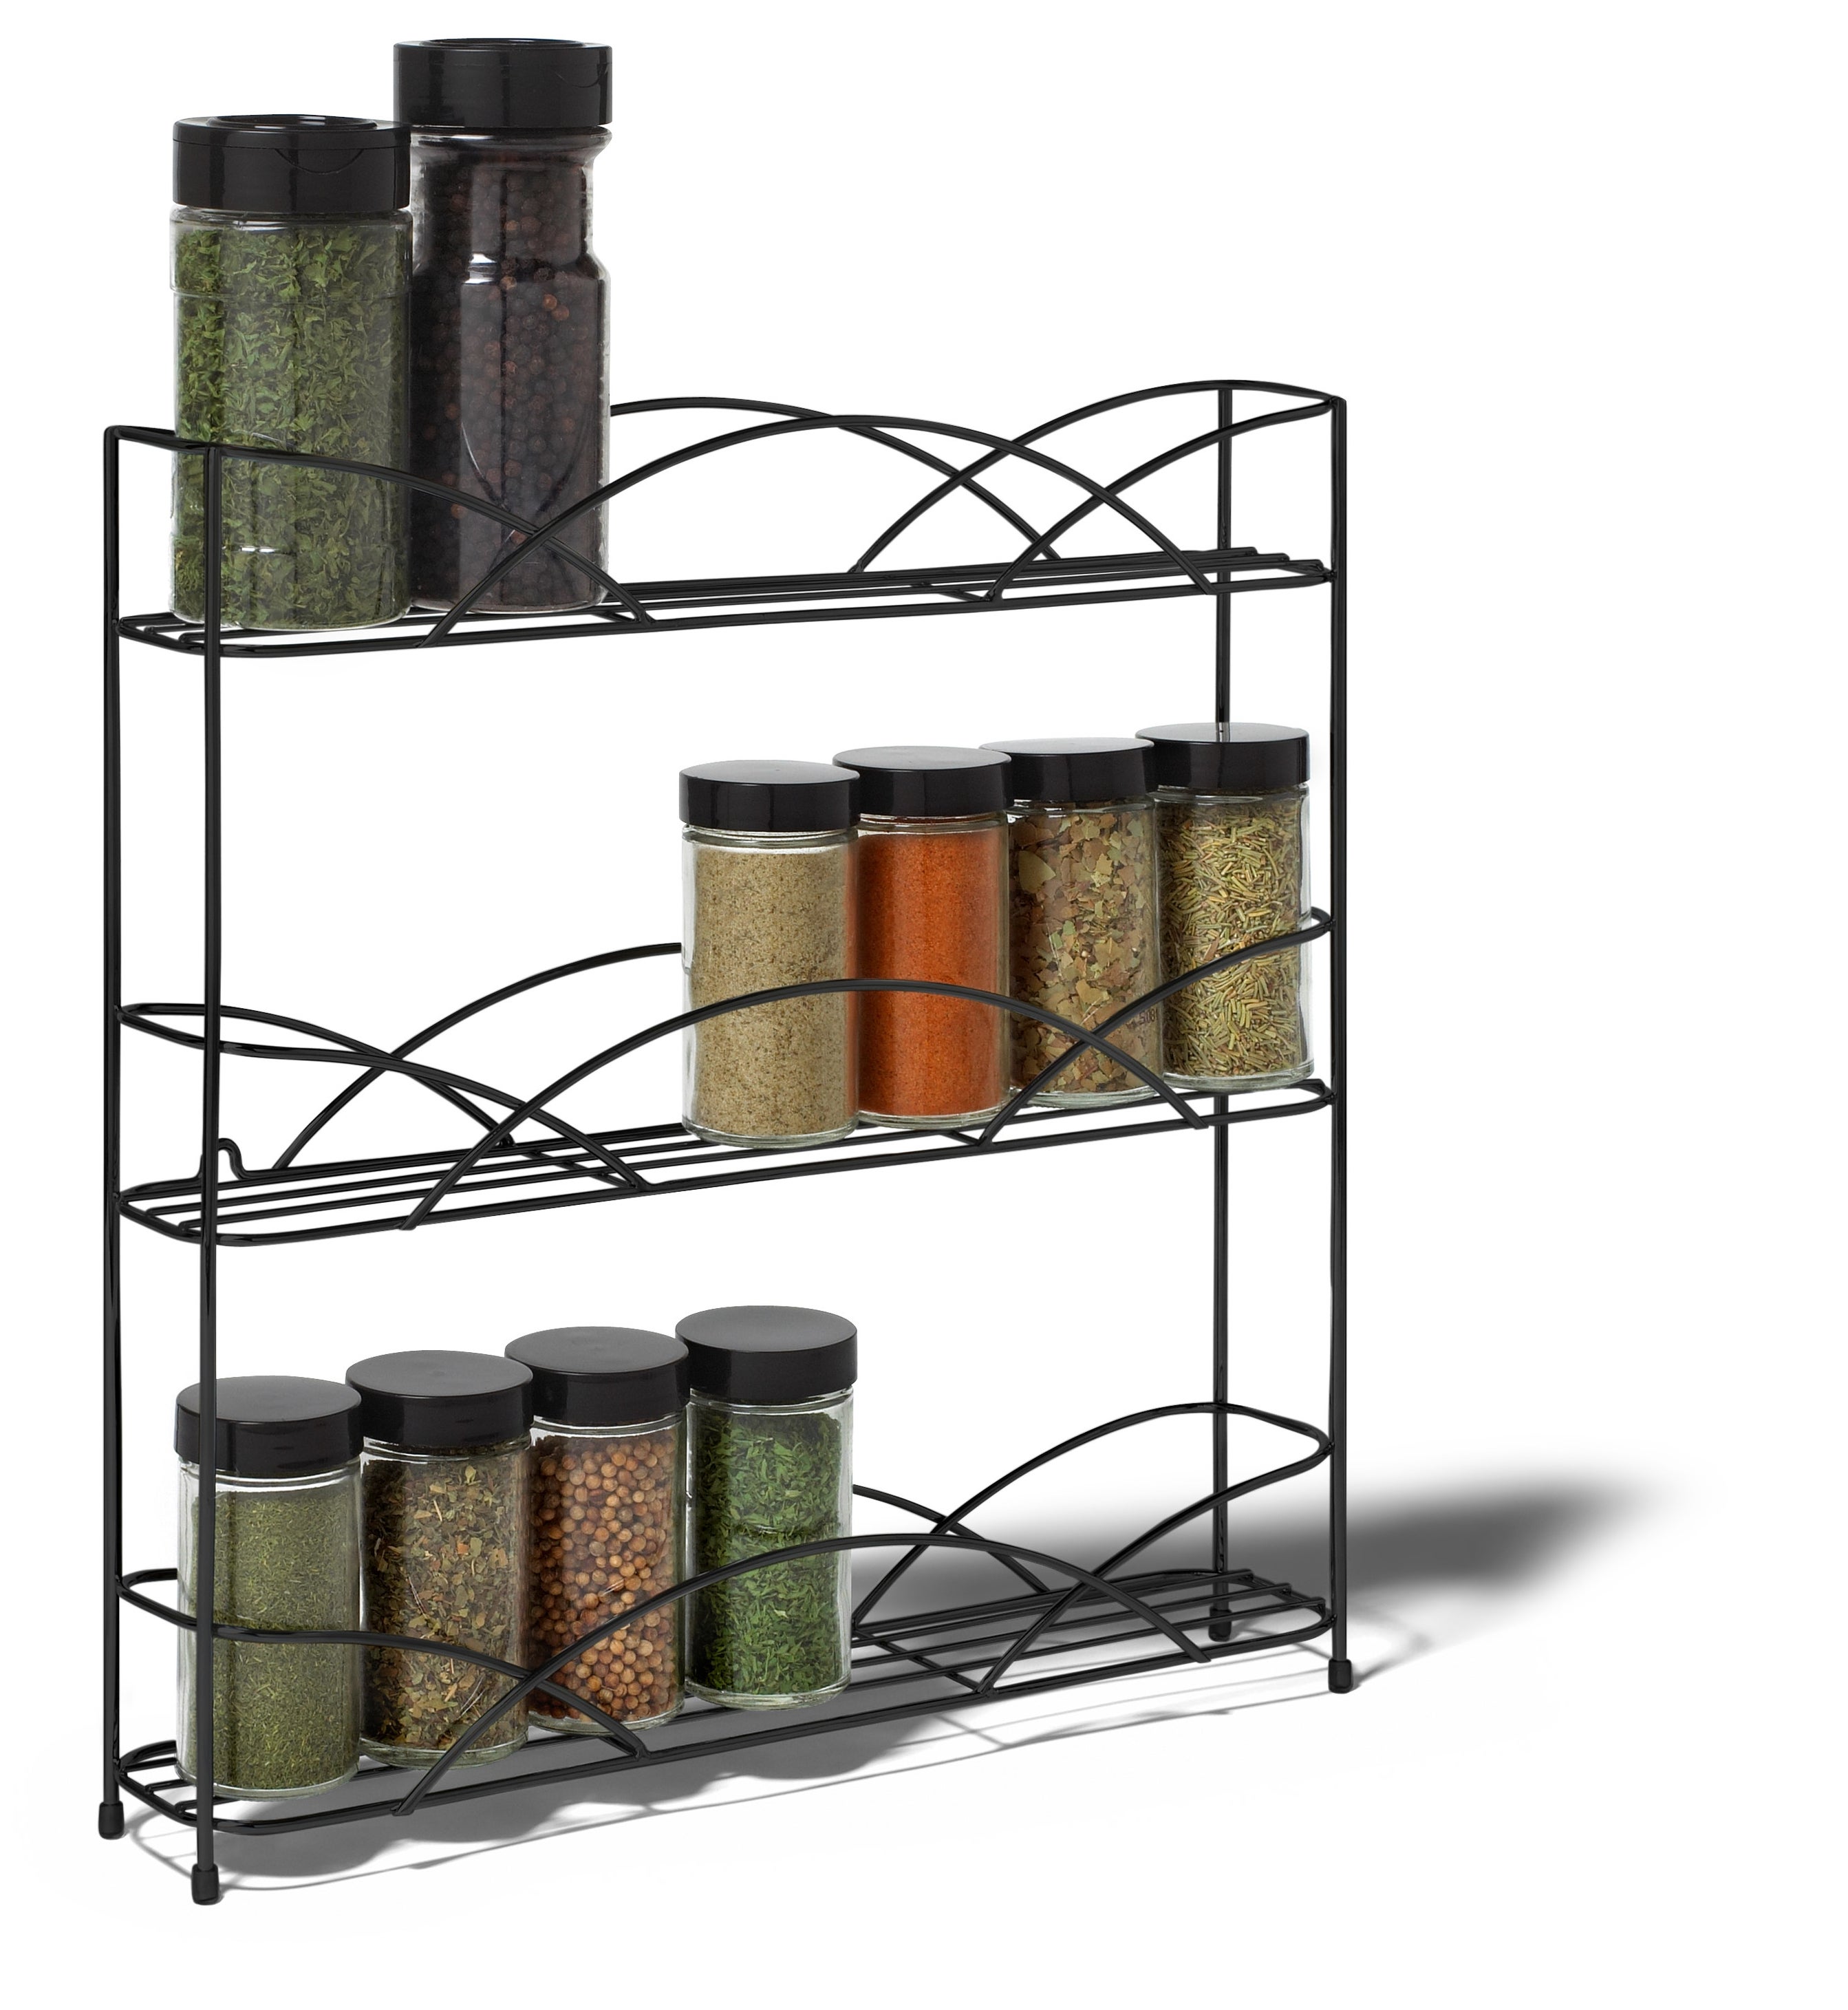 The black wire spice rack